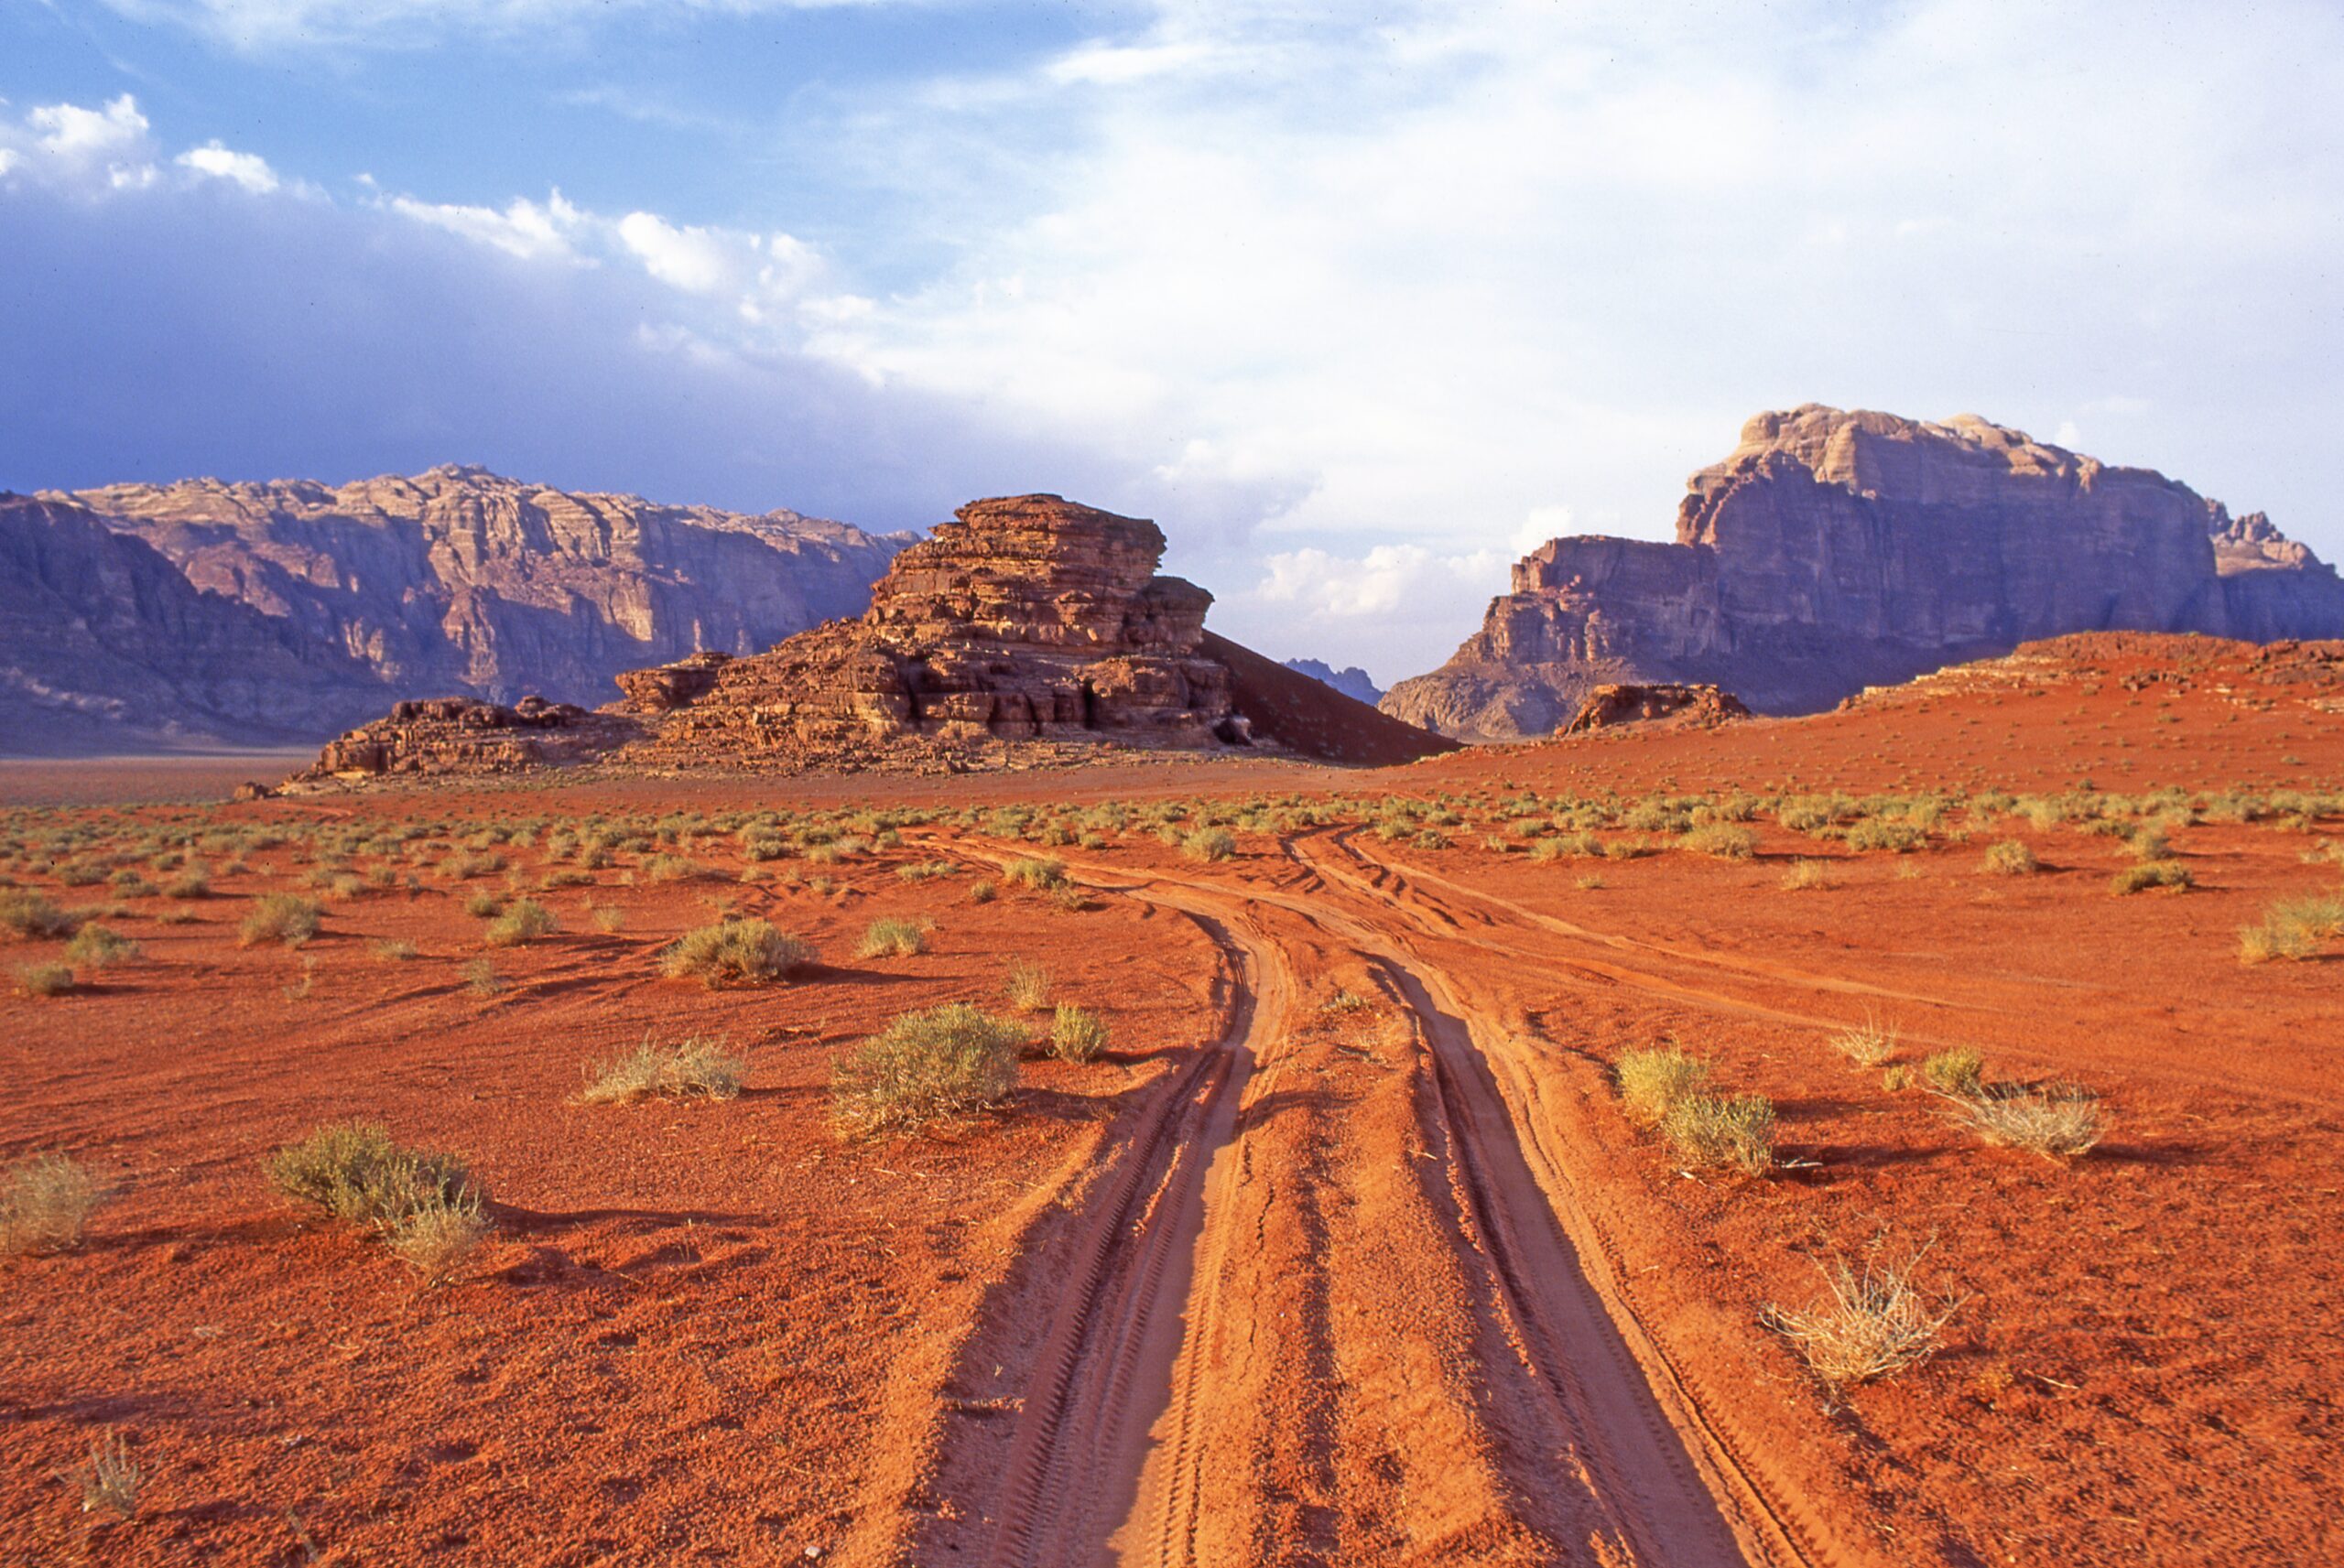 spectacular desert wilderness in Jordan – the magnificent landscape – “Wadi Rum”, also known as the Valley of the Moon